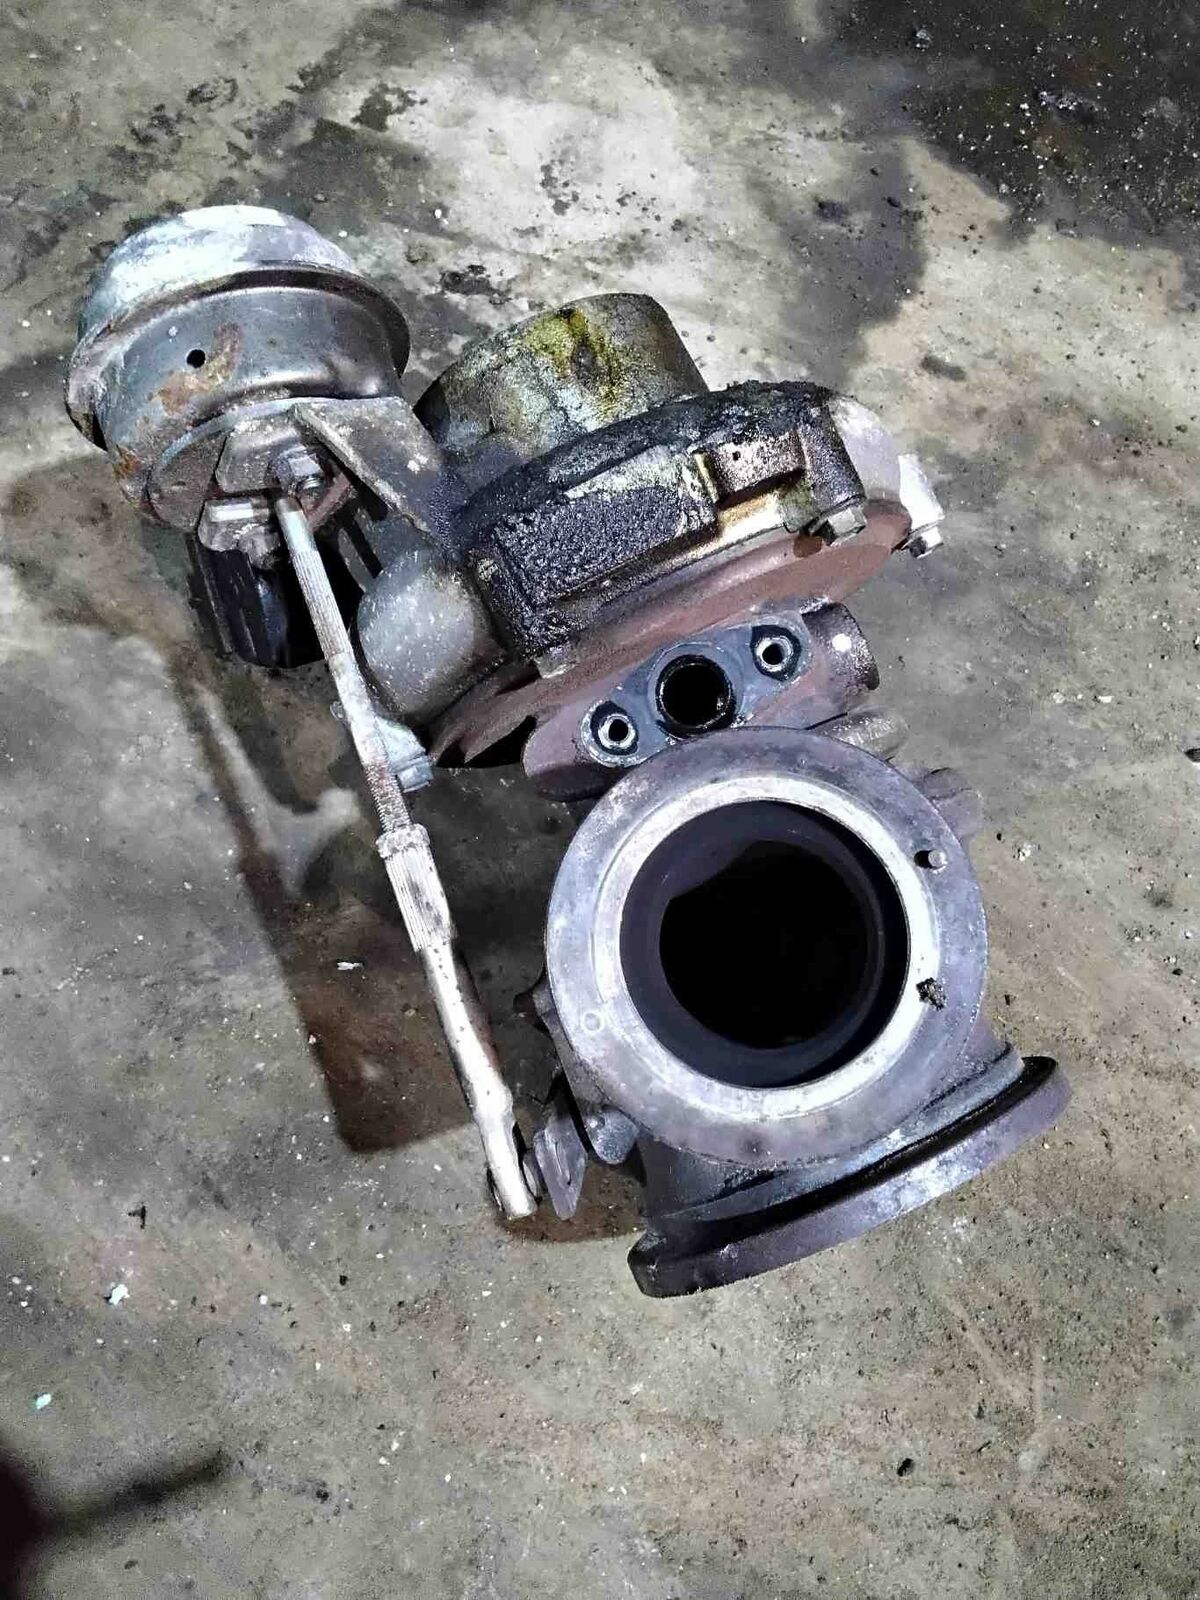 Turbo/supercharger BMW 750 SERIES 09 10 11 12 146k